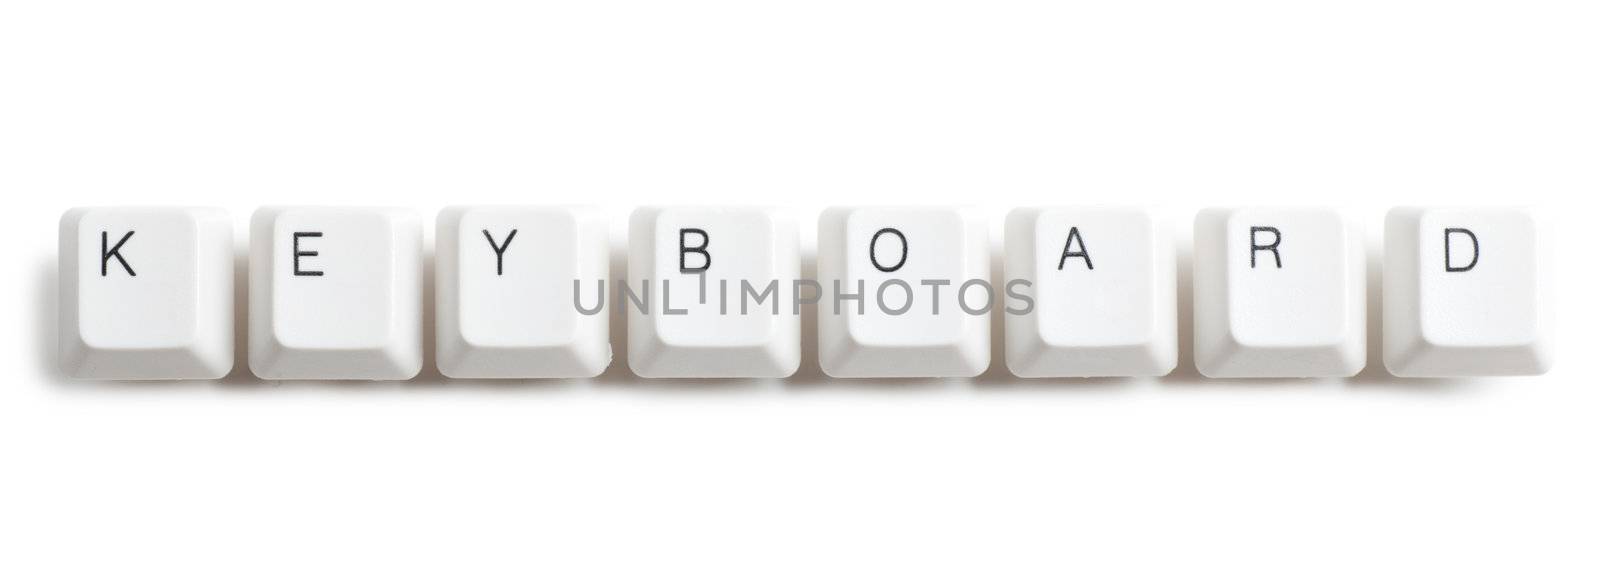 Keyboard word written with computer buttons over white background